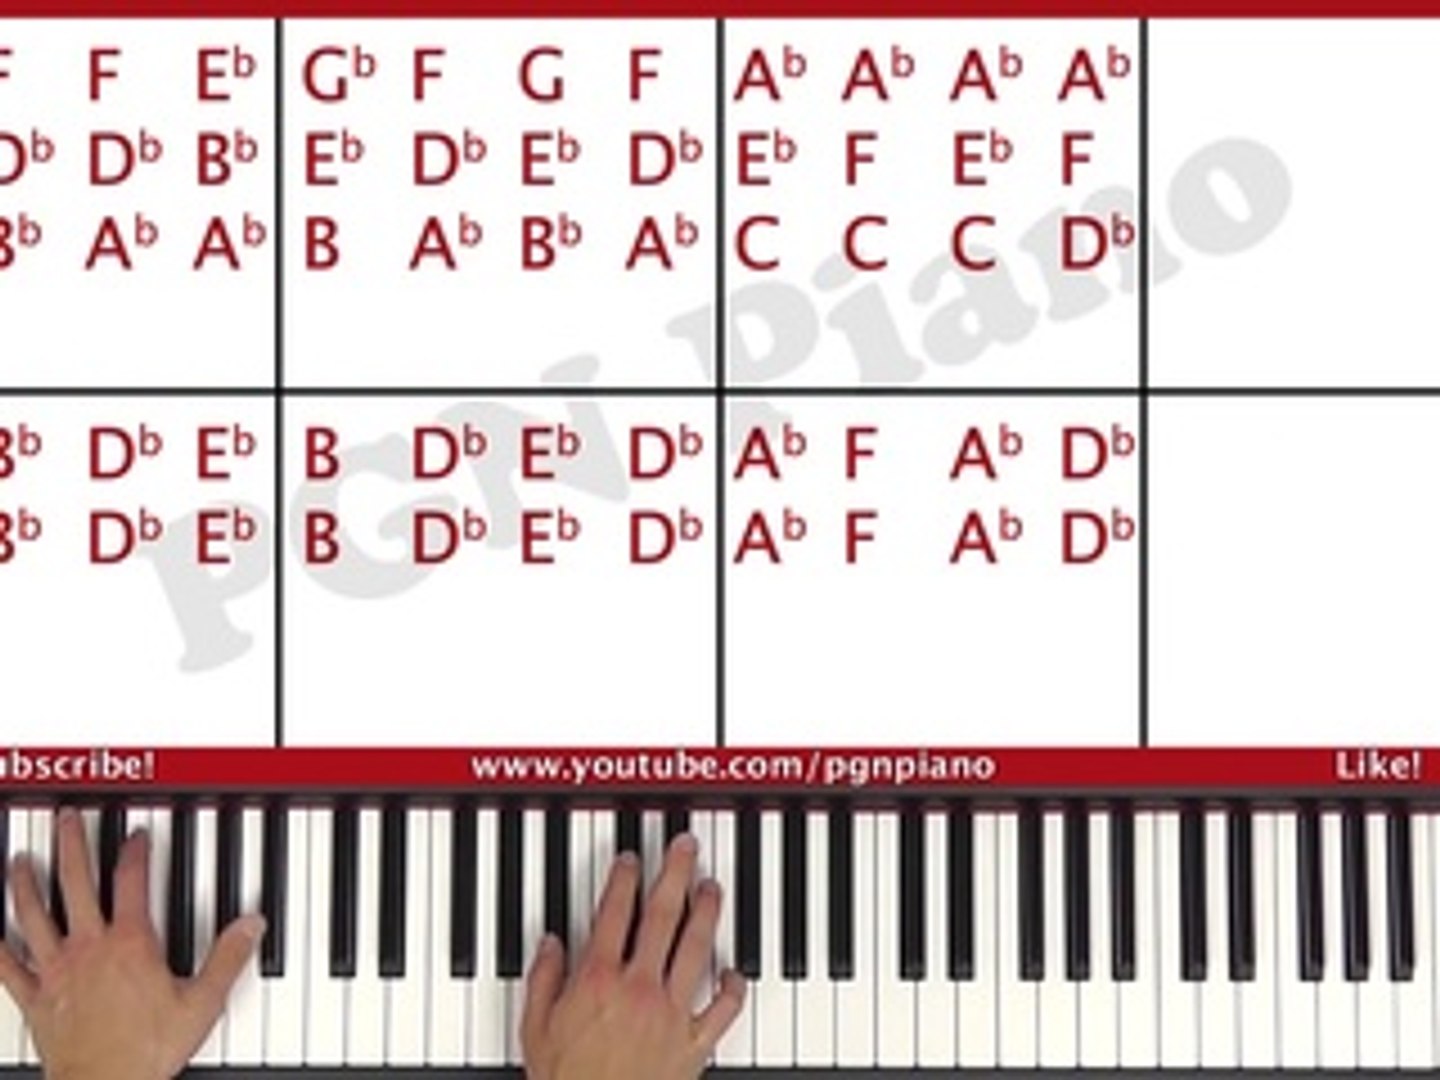 ♫ EASY - How To Play City Of Blinding Lights U2 Piano Tutorial Lesson - PGN  Piano - video Dailymotion